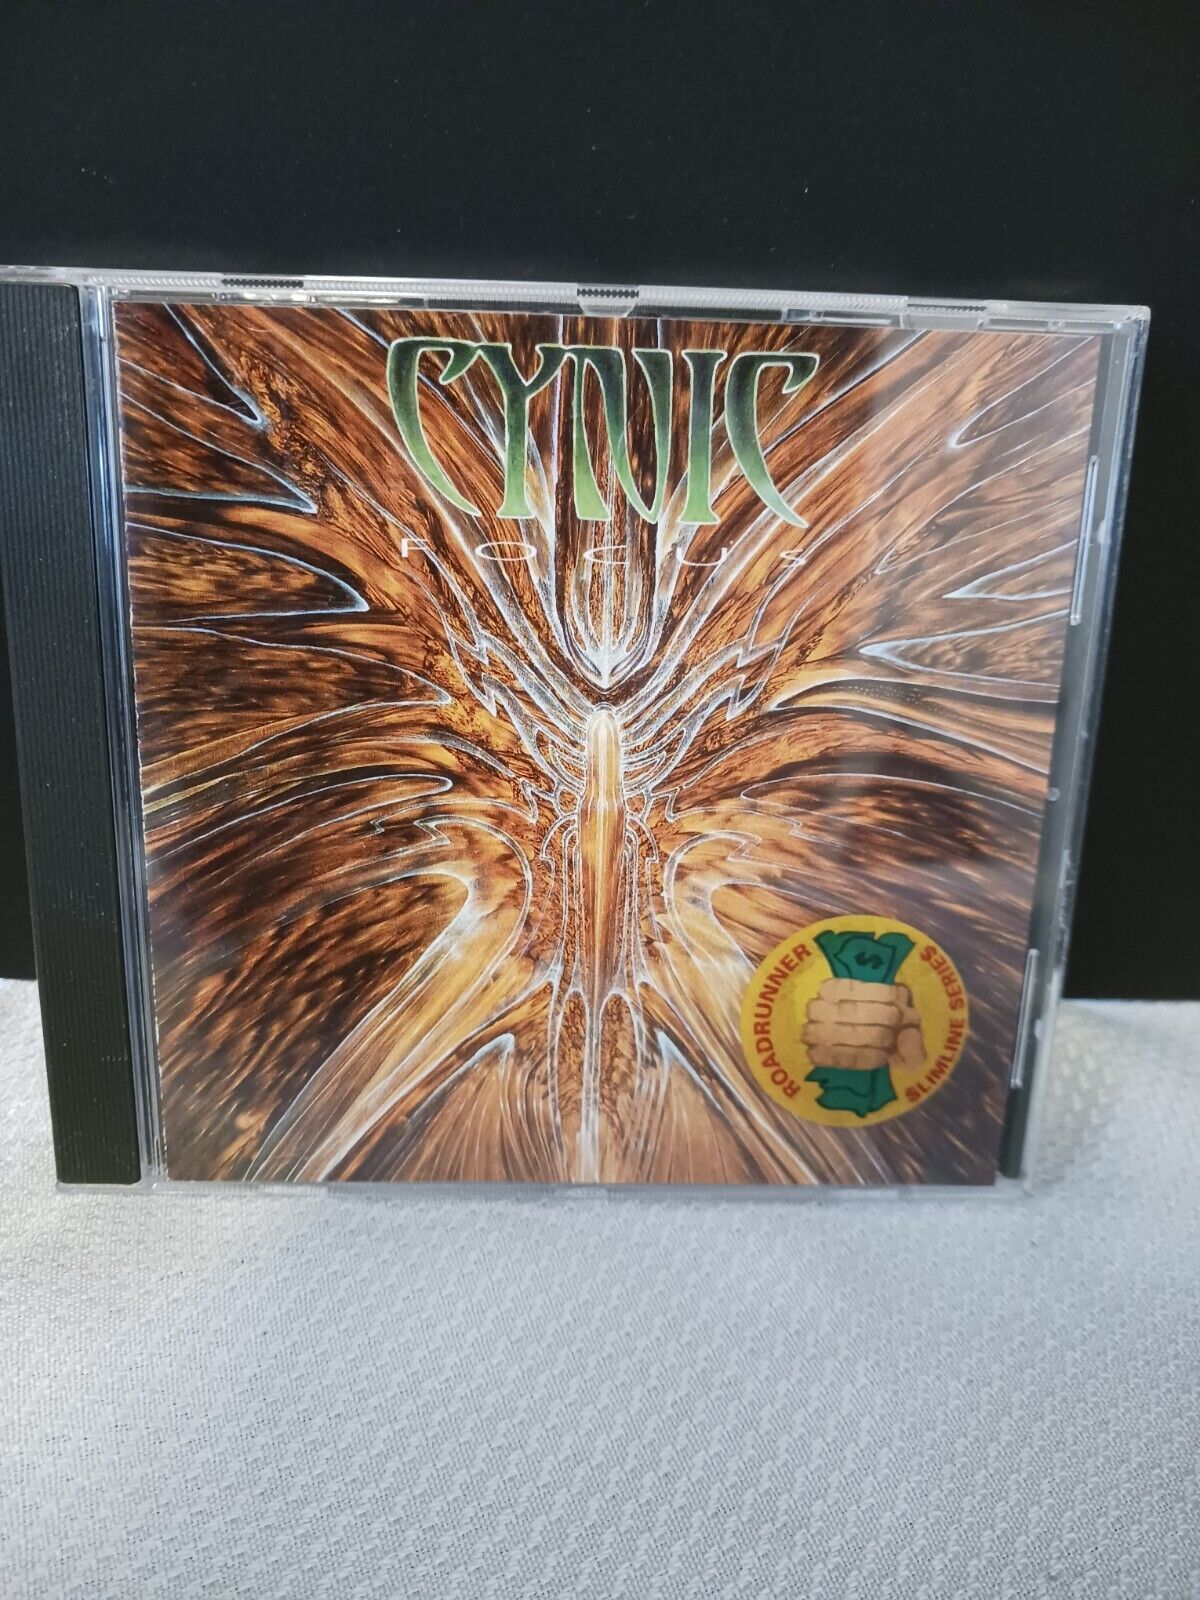 Cynic FOCUS CD Album 1993 Roadrunner RR9169-2 RARE OUT OF PRINT Made In Germany